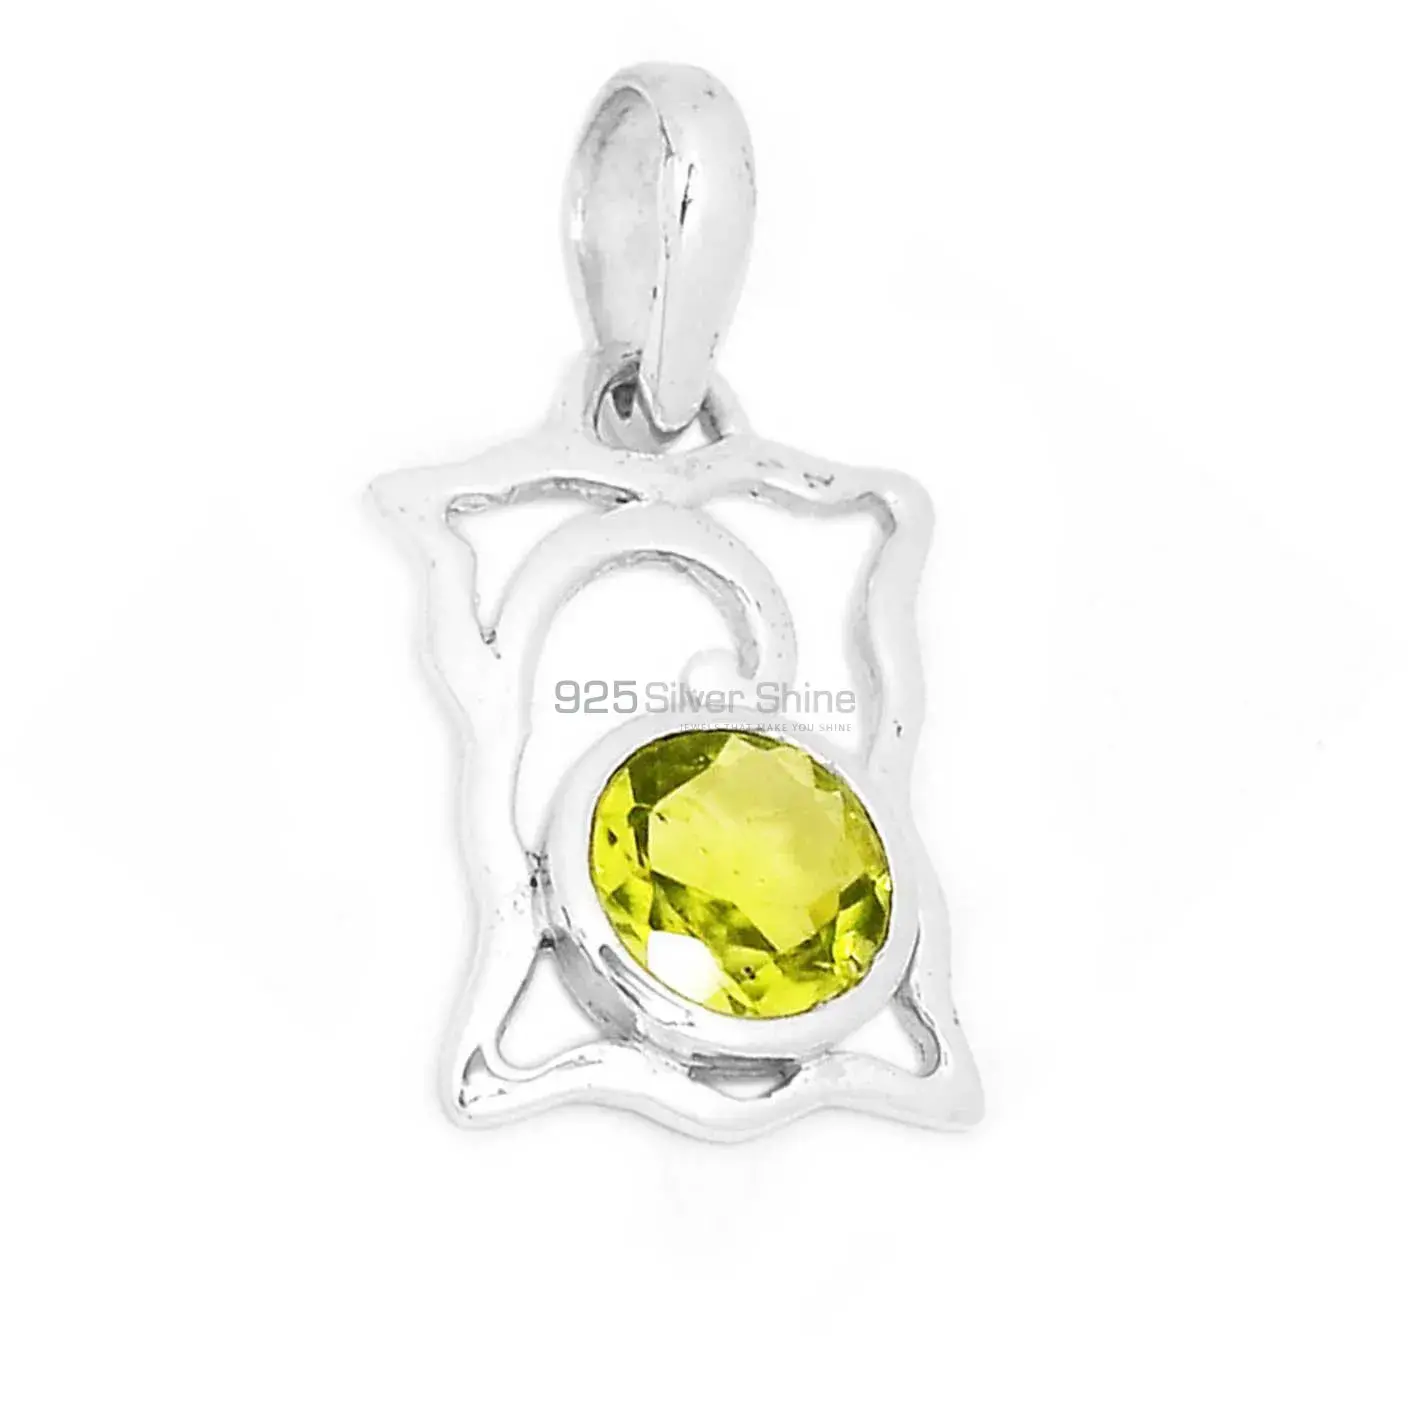 High Quality Solid Sterling Silver Handmade Pendants In Peridot Gemstone Jewelry 925SP281-1_1